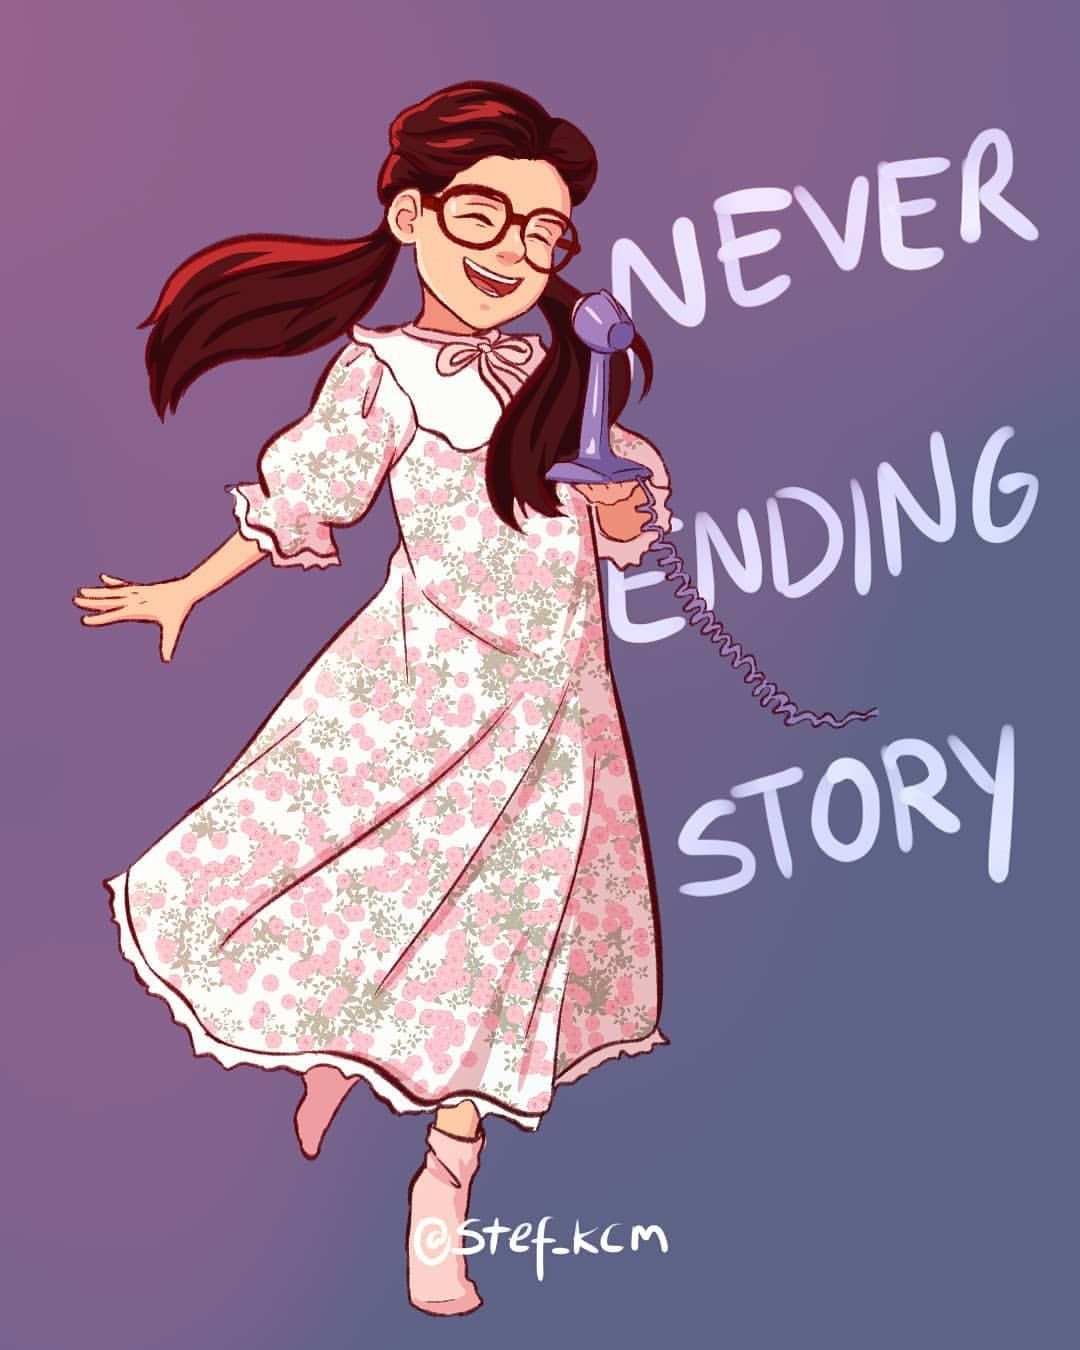 Stranger Things Suzie Singing Neverending Story by Stefanie, stef_kcm, Gabriella Pizzolo, Season. Stranger things, Stranger things netflix, Stranger things quote